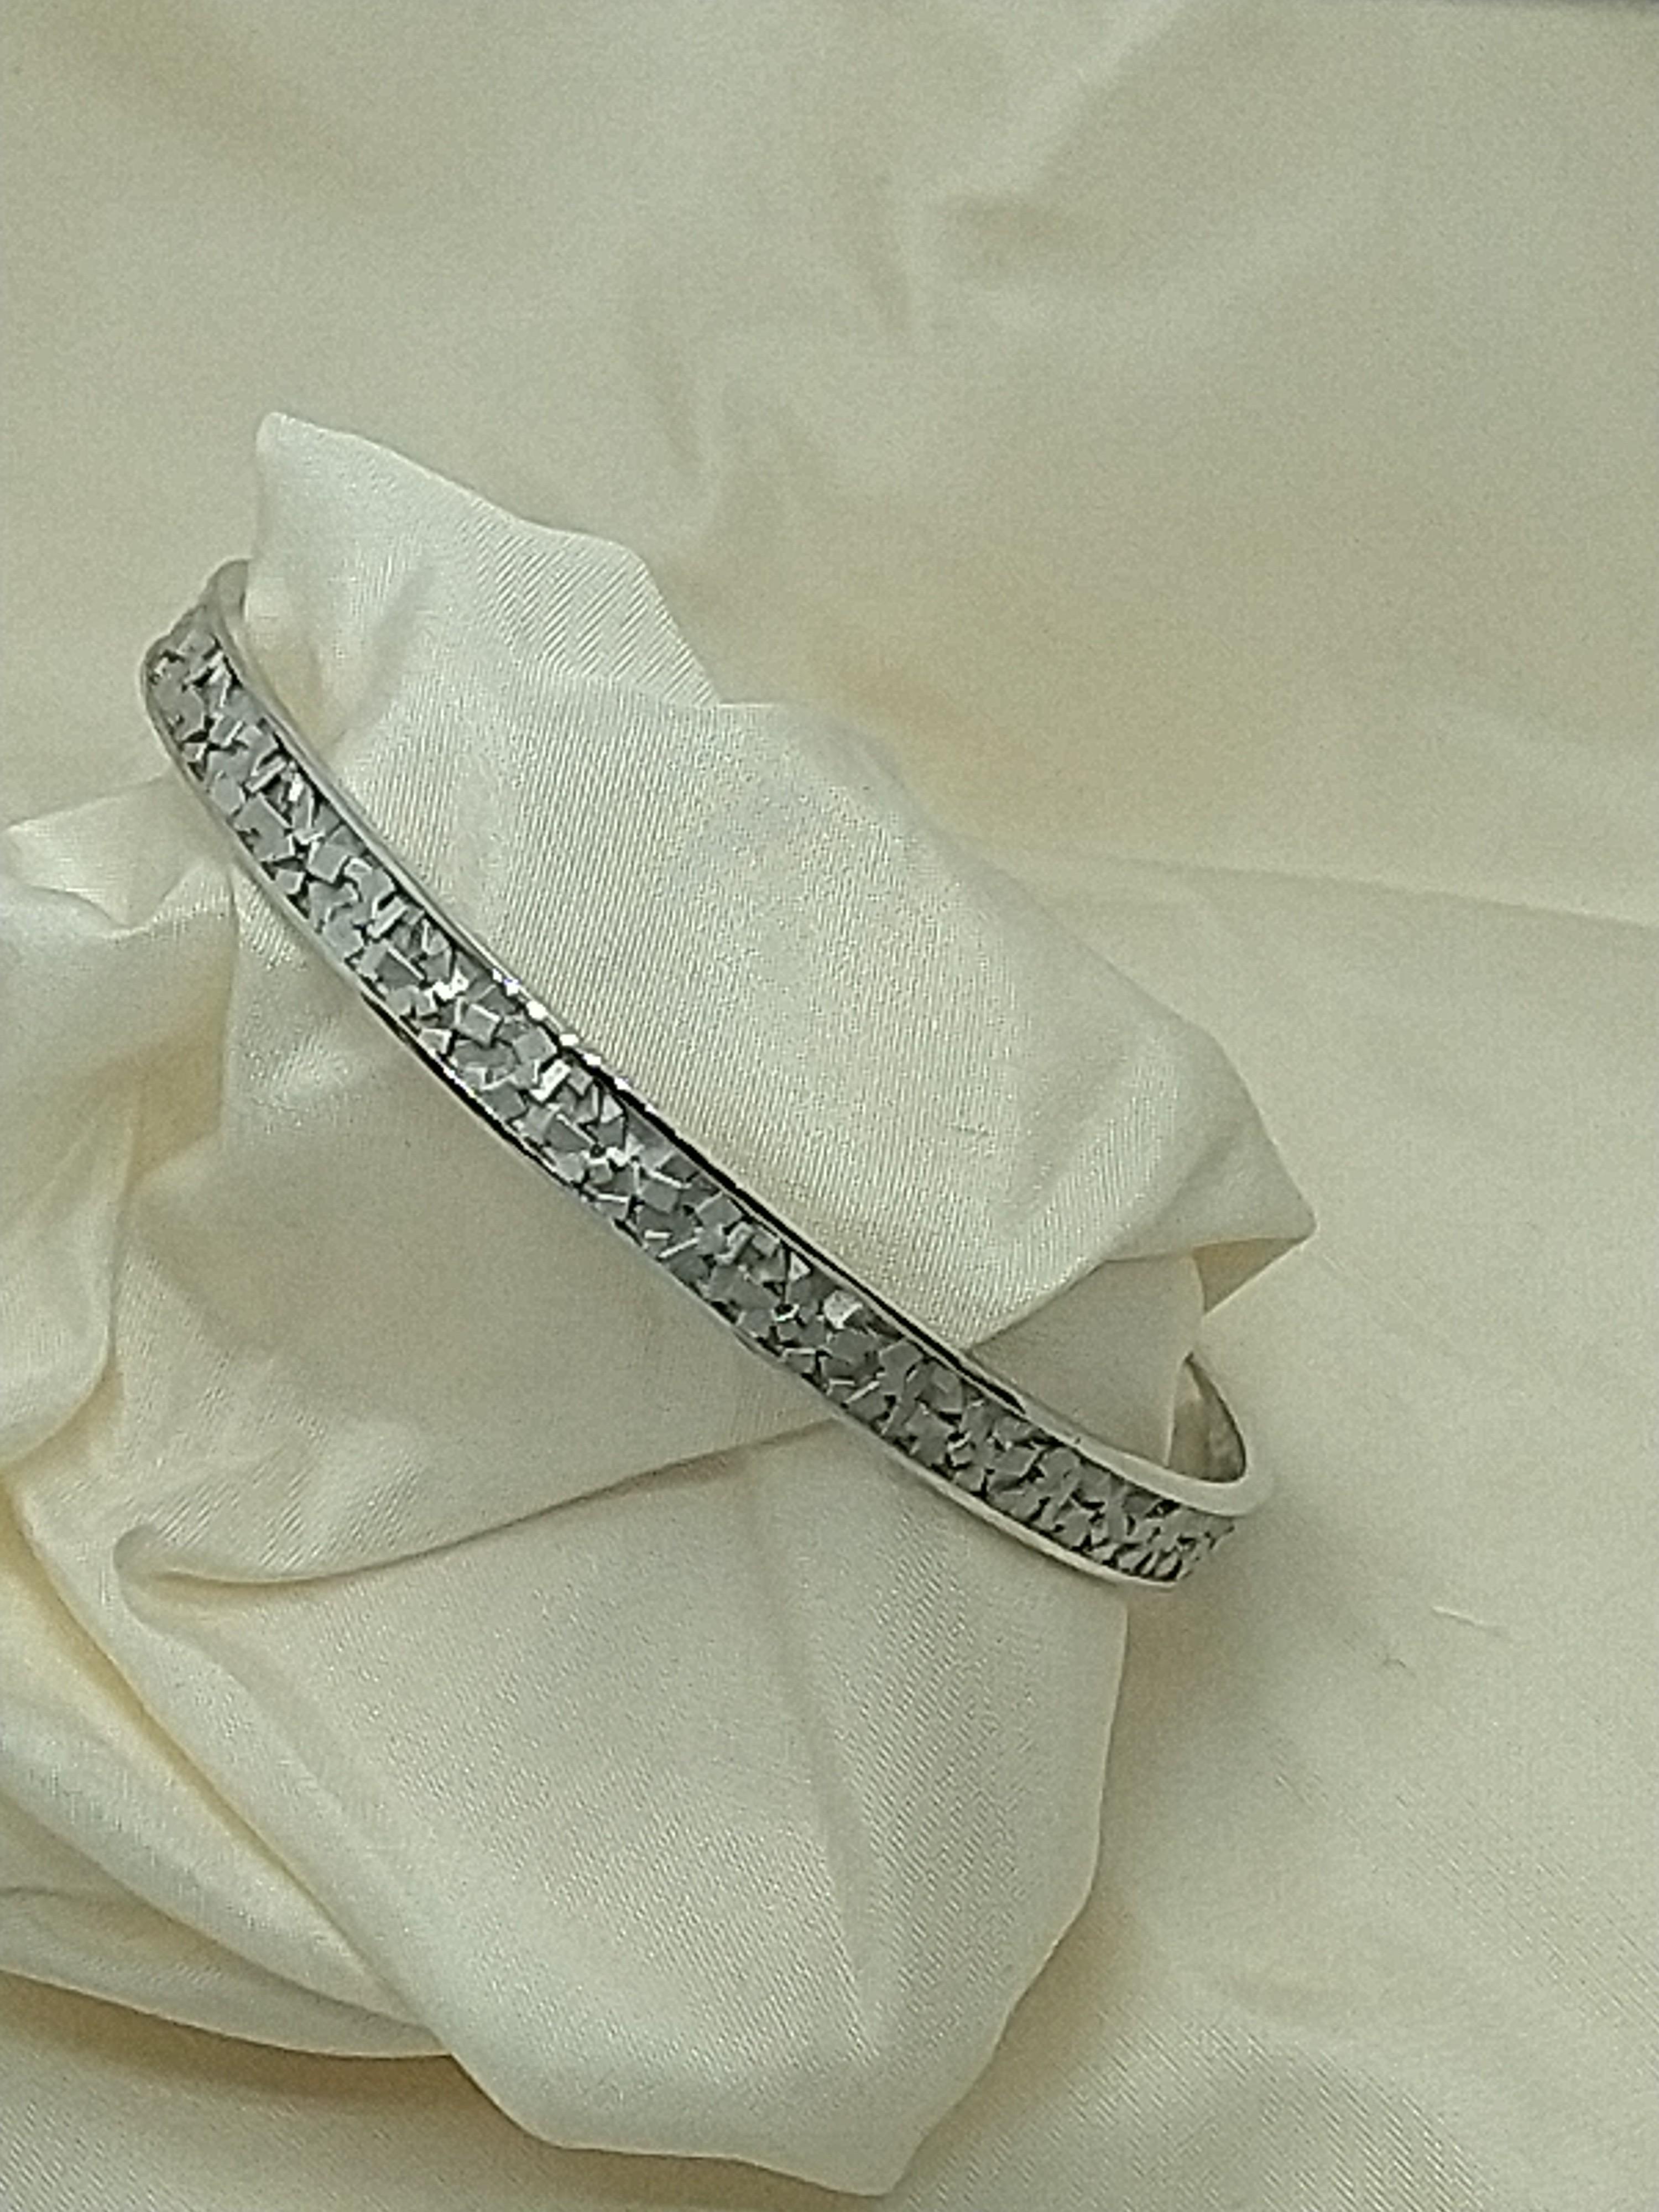 18 Karat White Gold Rectangles Bangle Bracelet In New Condition For Sale In New York, NY